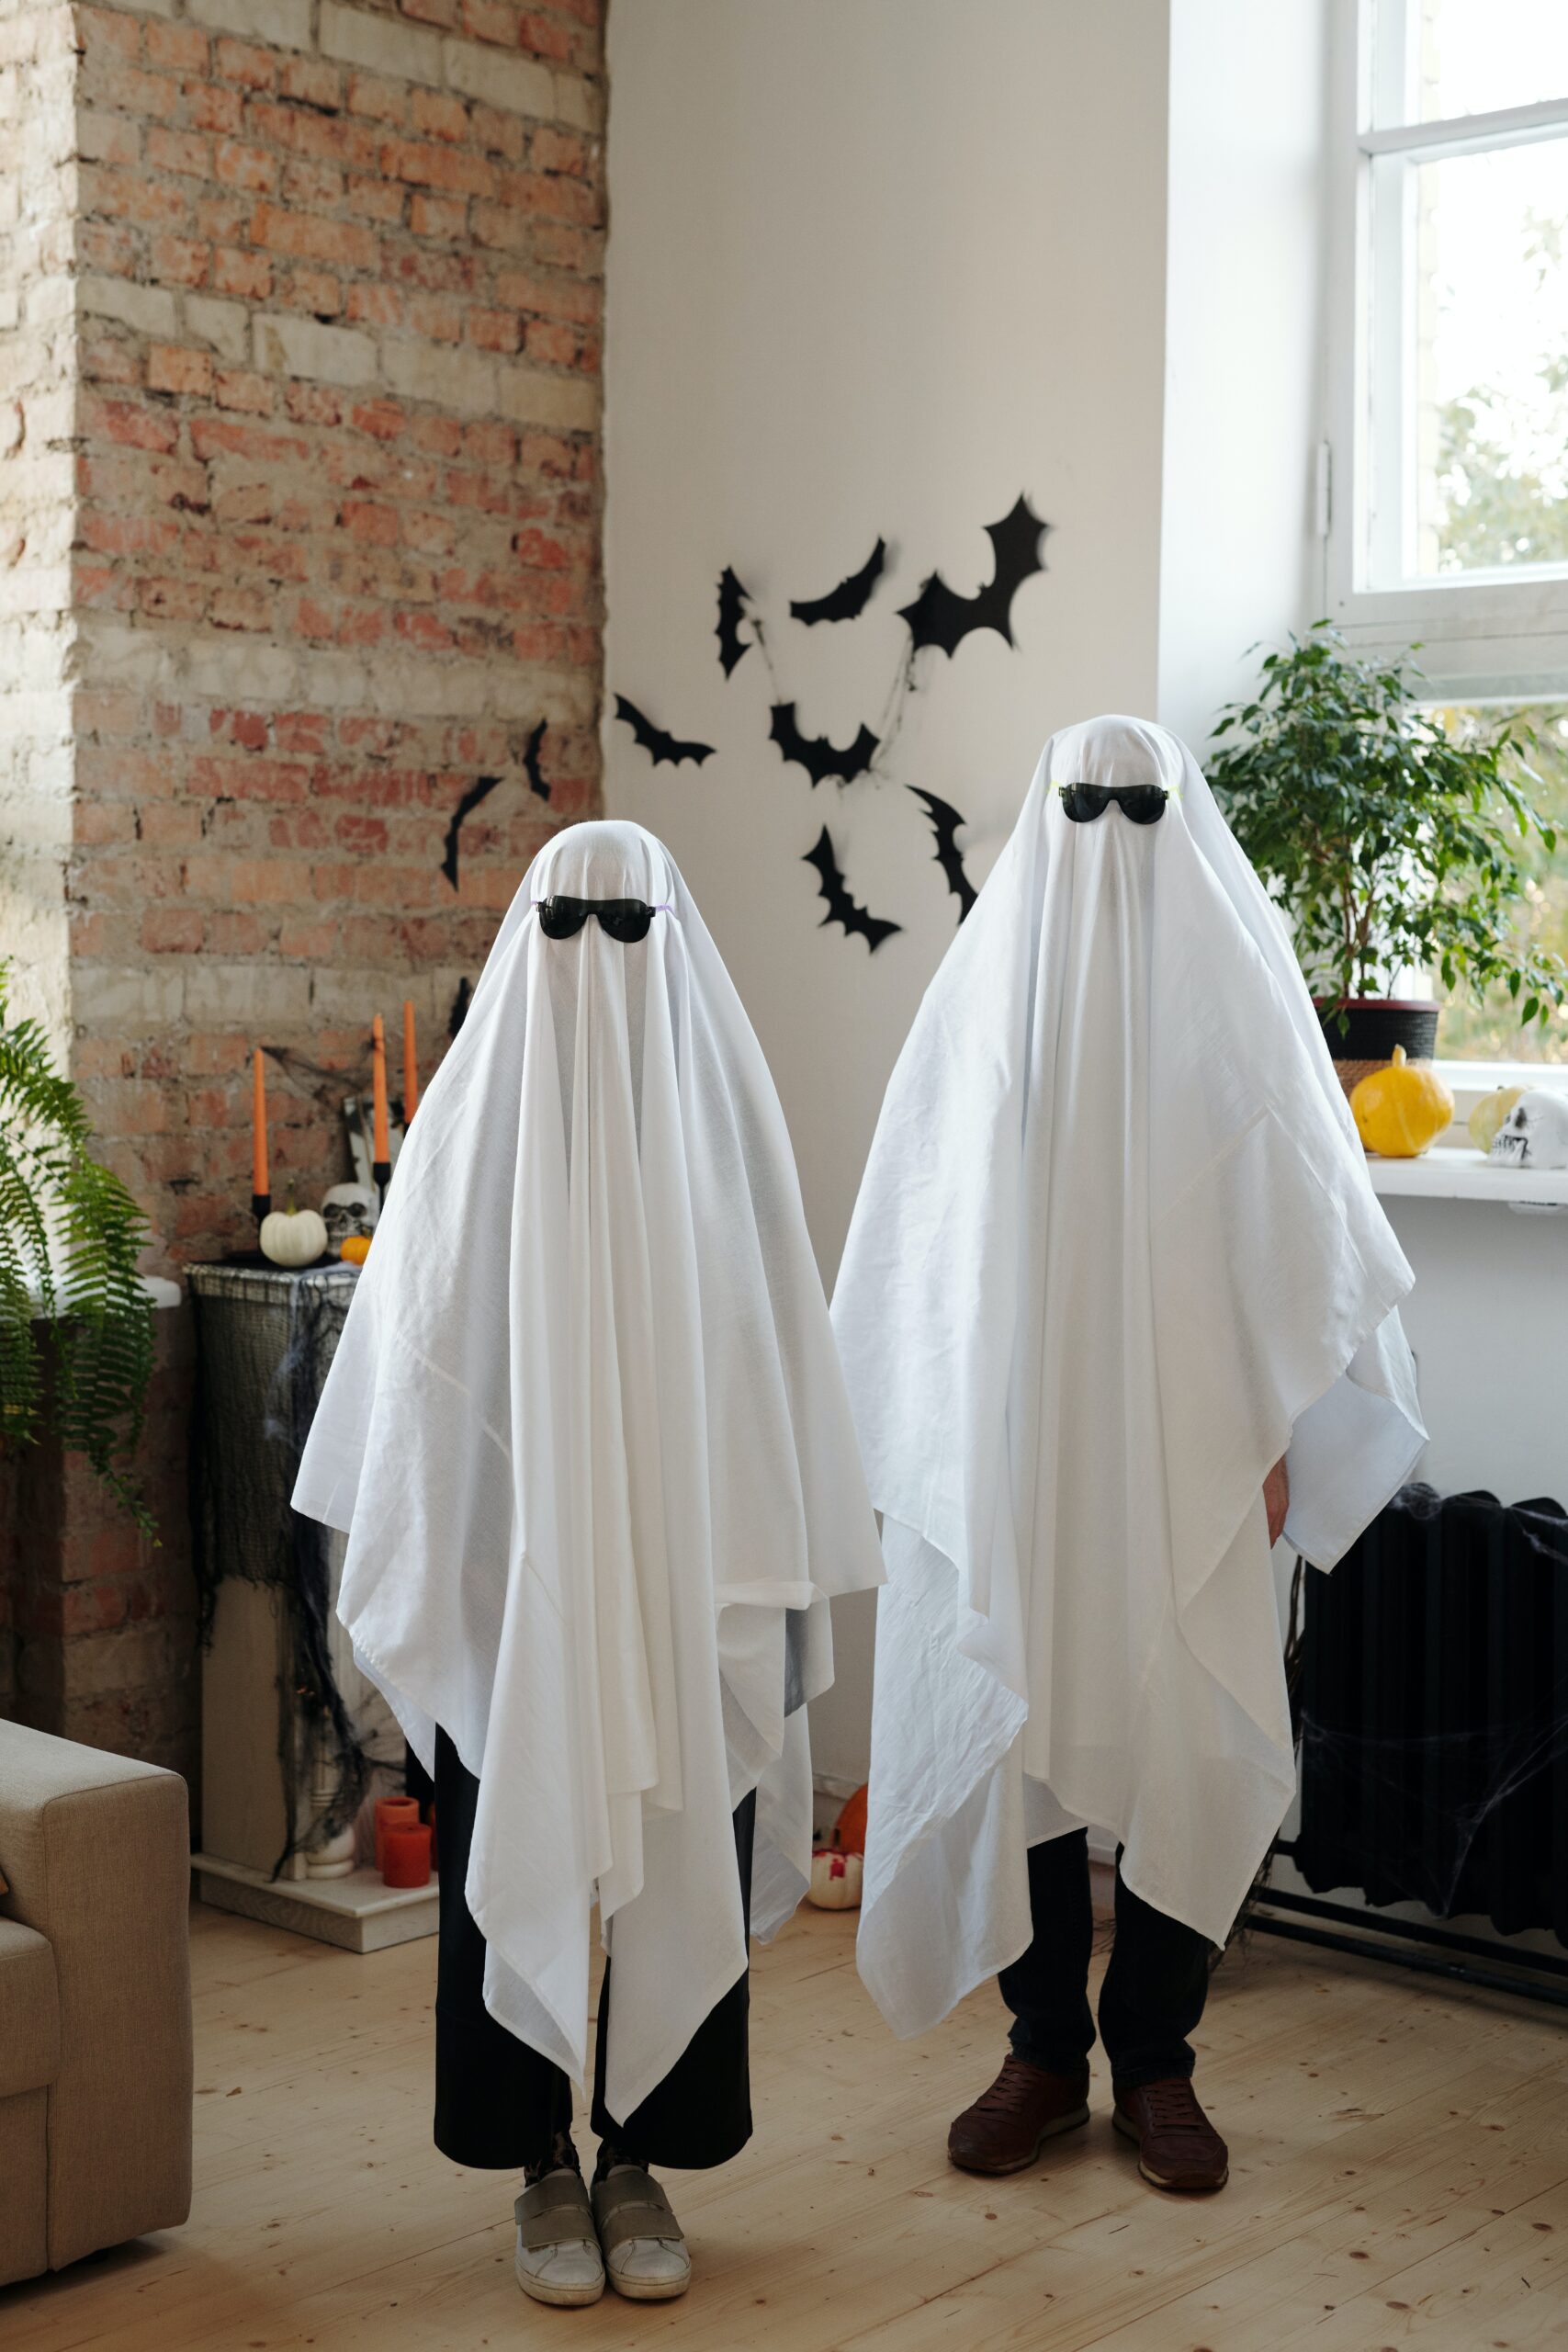 Two people with do-it-yourself ghost costumes.